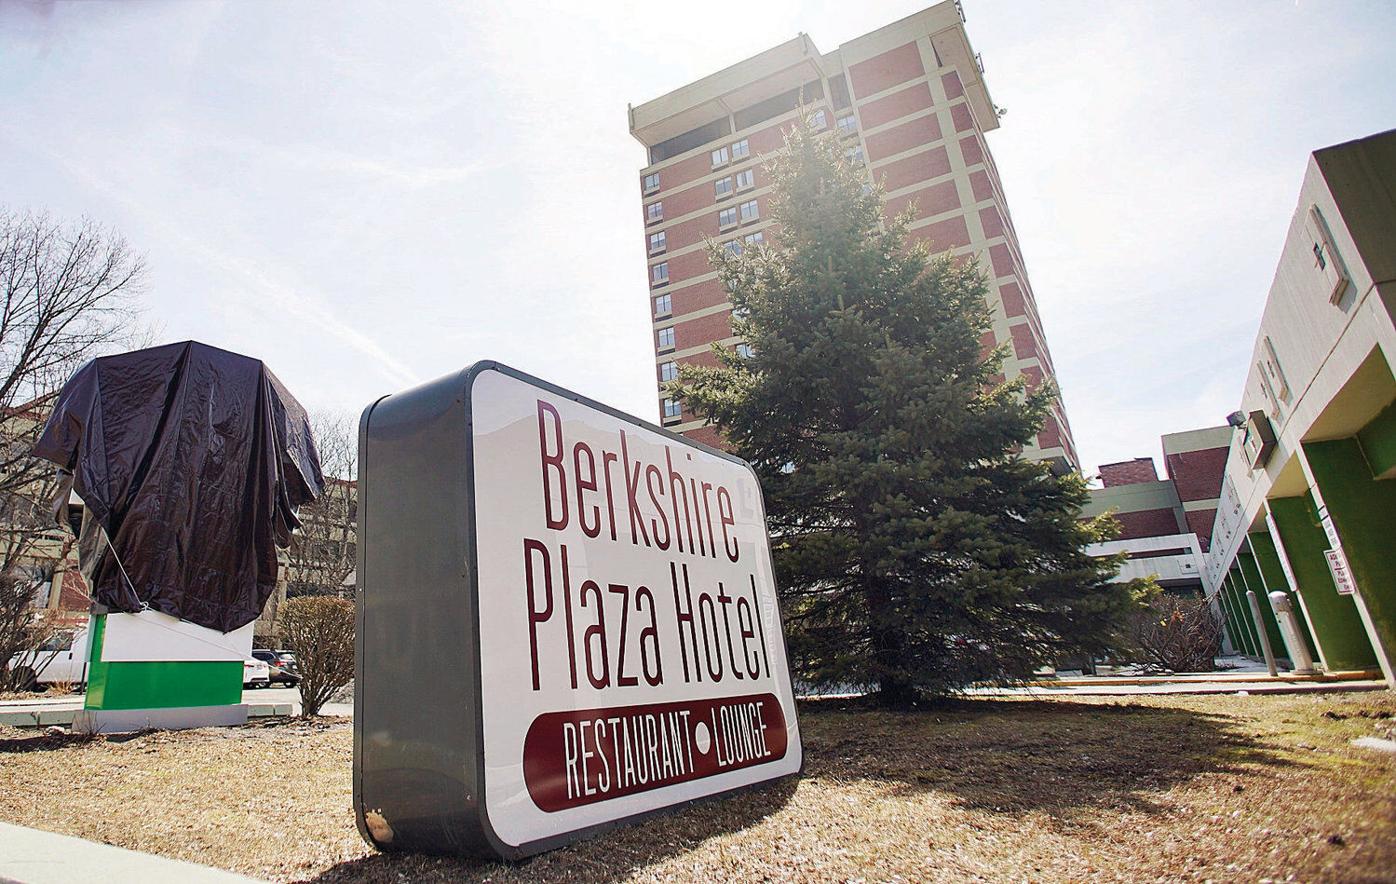 Holiday Inn signs covered up while renovations continue at former Crowne Plaza